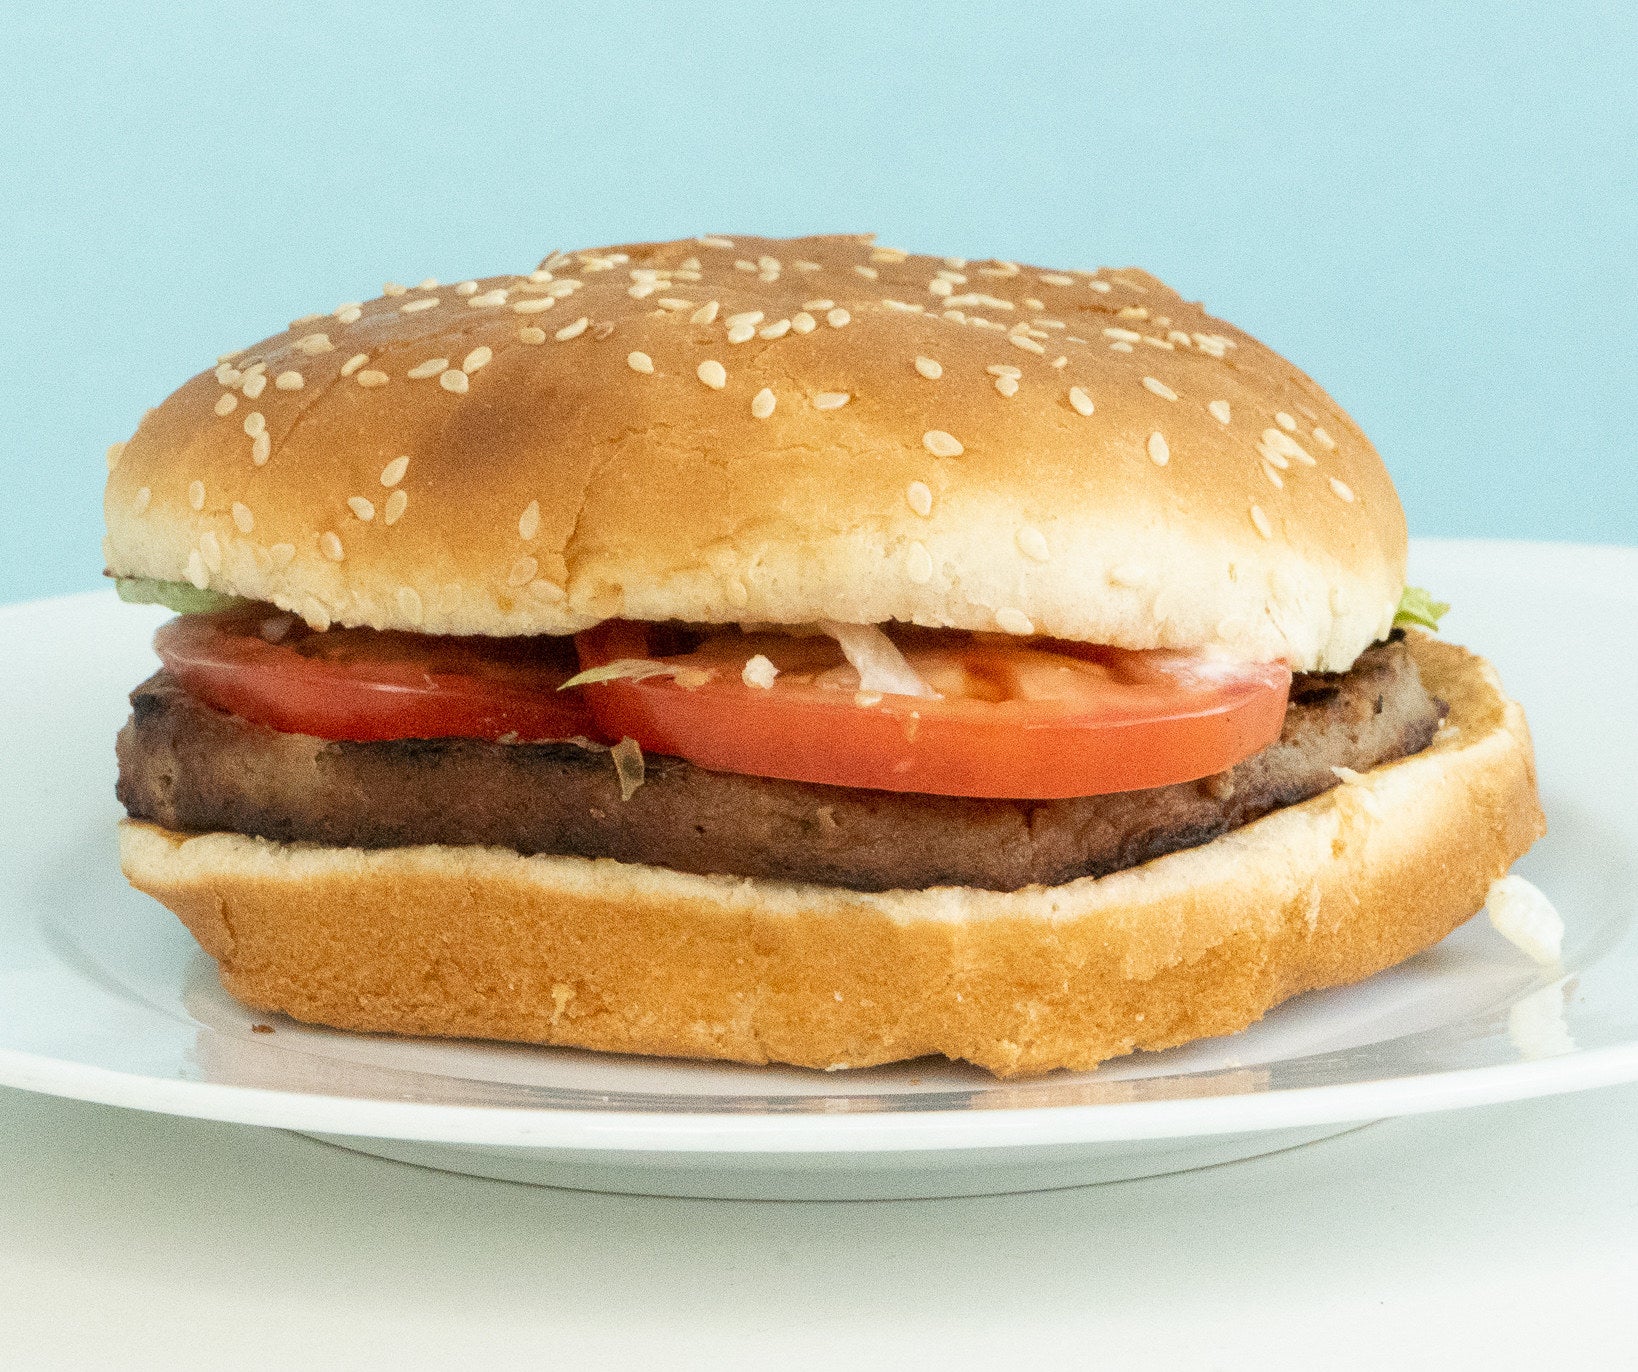 a flat burger with tomatoes exposed and a sesame seed bun